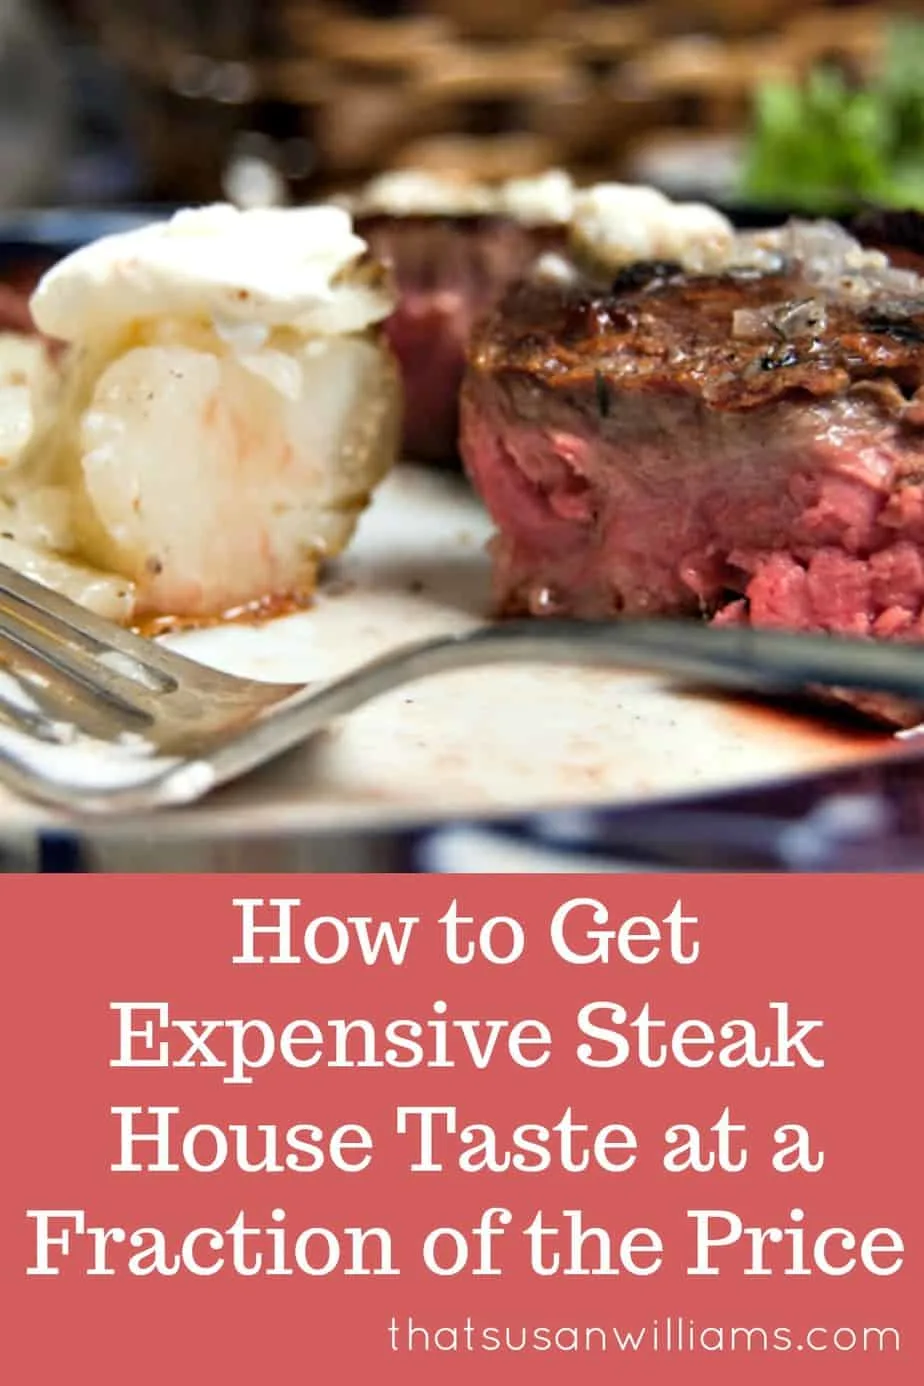 How to Get Expensive Steak House Taste at a Fraction of the Price, through Dry Aging, Salting, and Compound Butter #steak #beef #dryage #dryagedbeef #dryagingsteaks